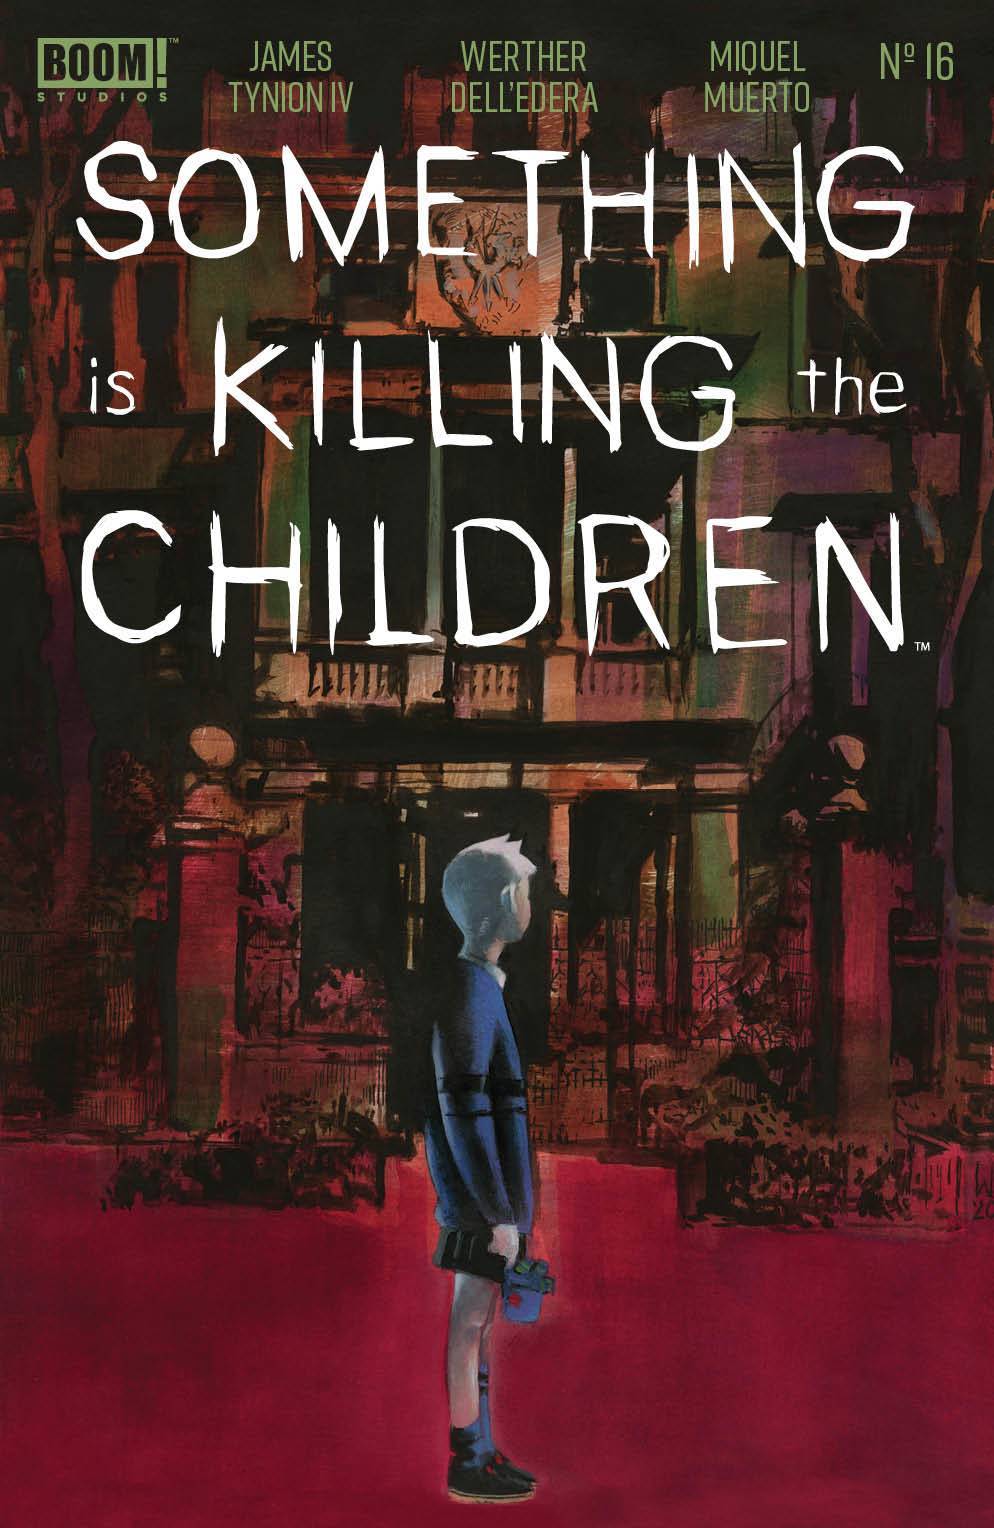 The One Stop Shop Comics & Games Something Is Killing The Children #16 Cvr A Dell Edera (05/26/2021) BOOM! STUDIOS